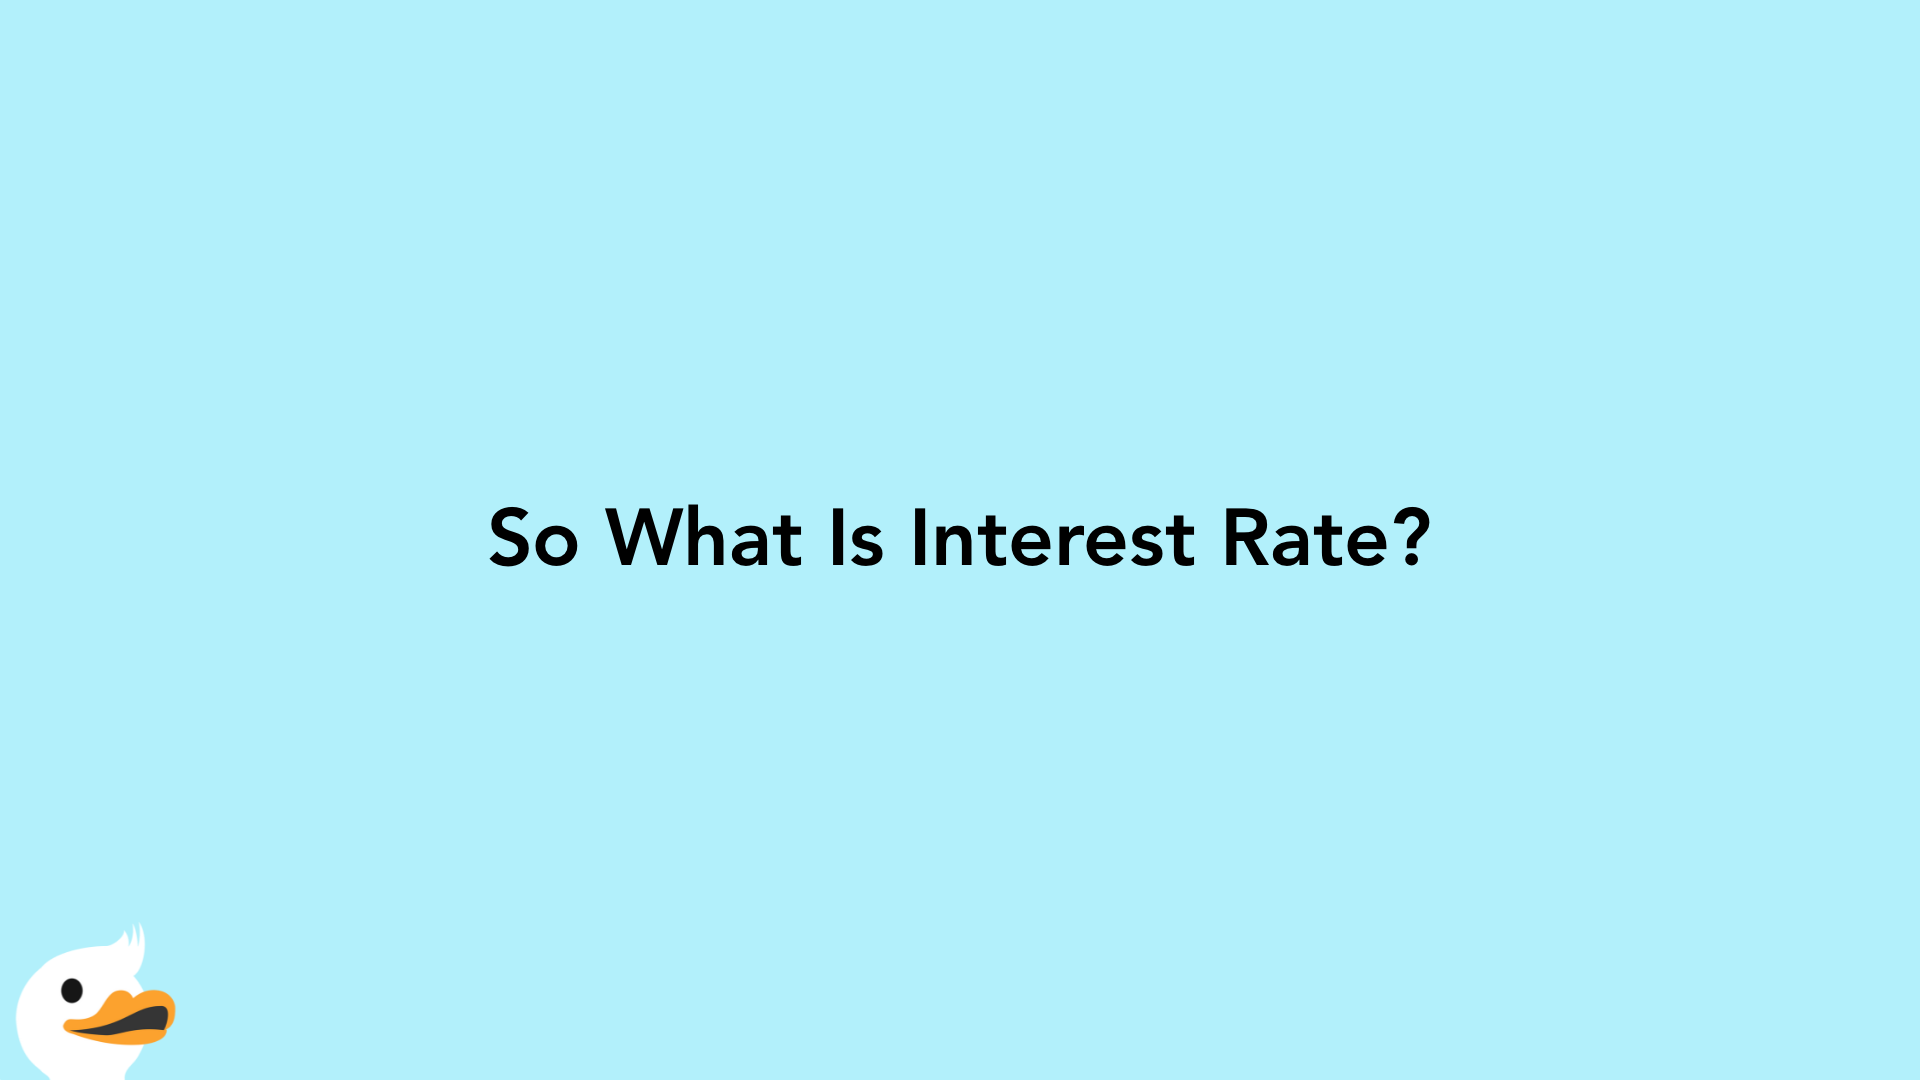 So What Is Interest Rate?